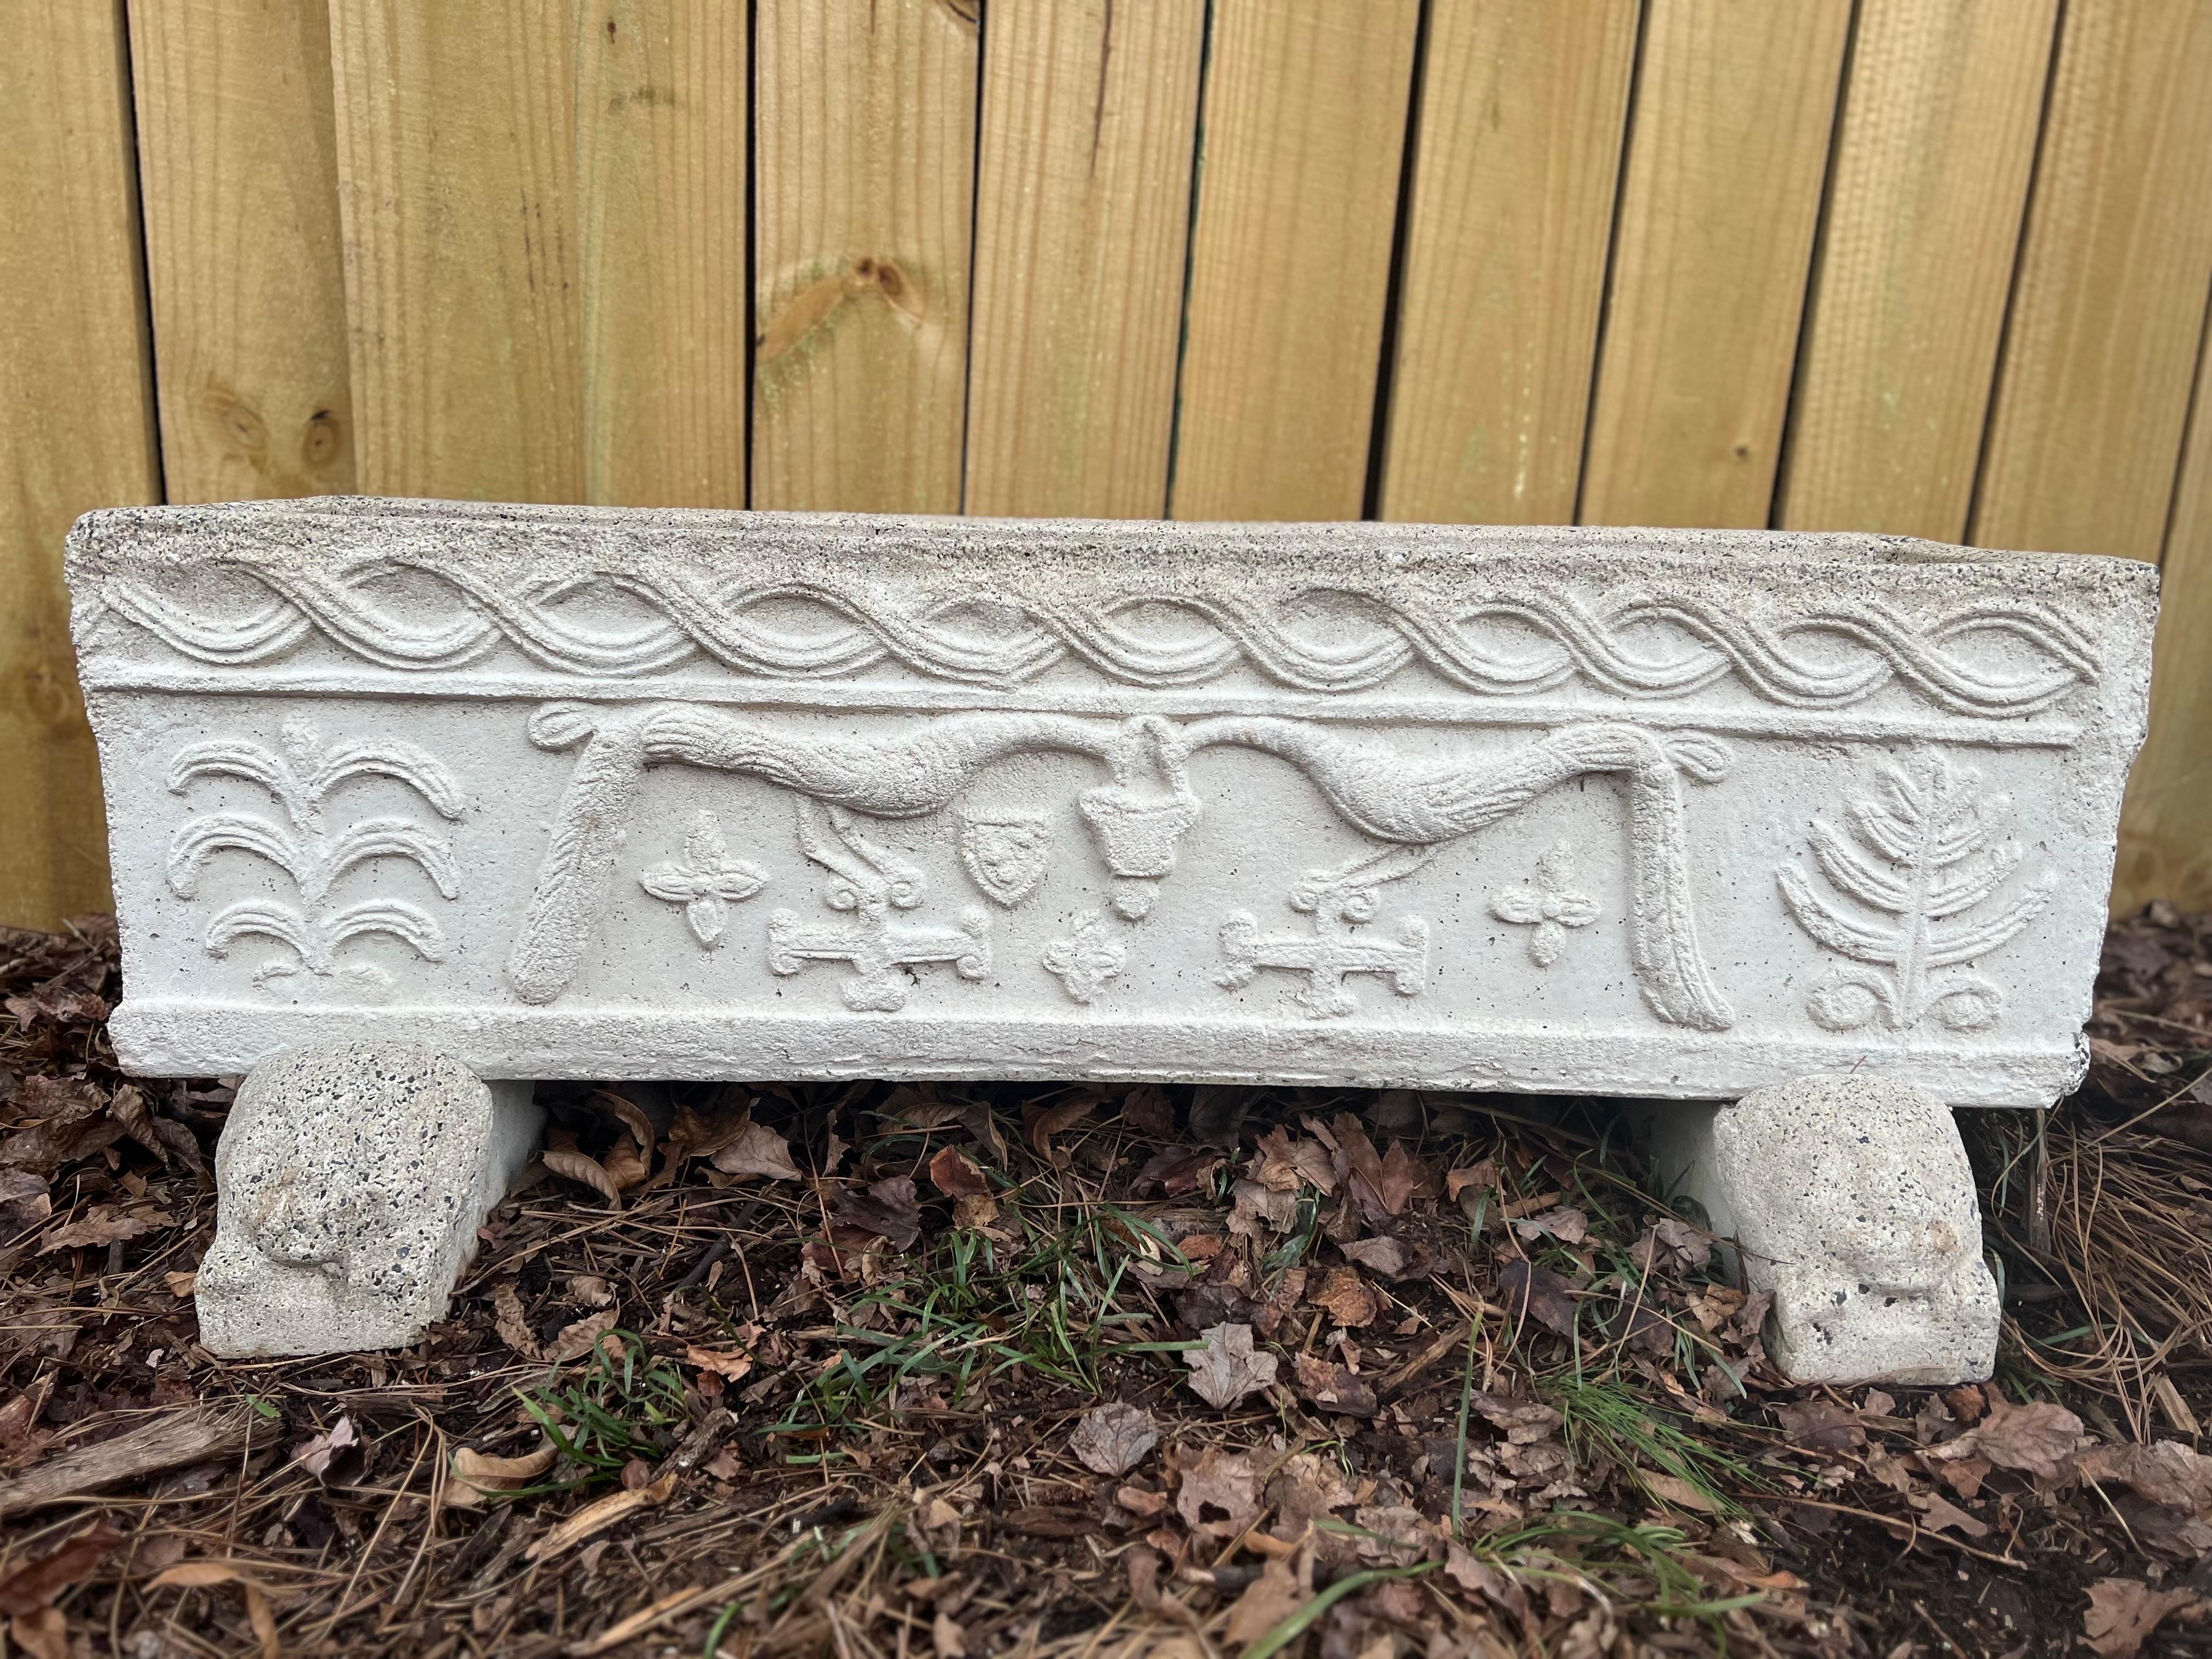 Antique Cast Stone planter with carving of Peacocks, tree's and symbols.  Rests on two pedestals with lion heads.

Rectangular trough shape with drainage holes for plants.  See images for condition.

